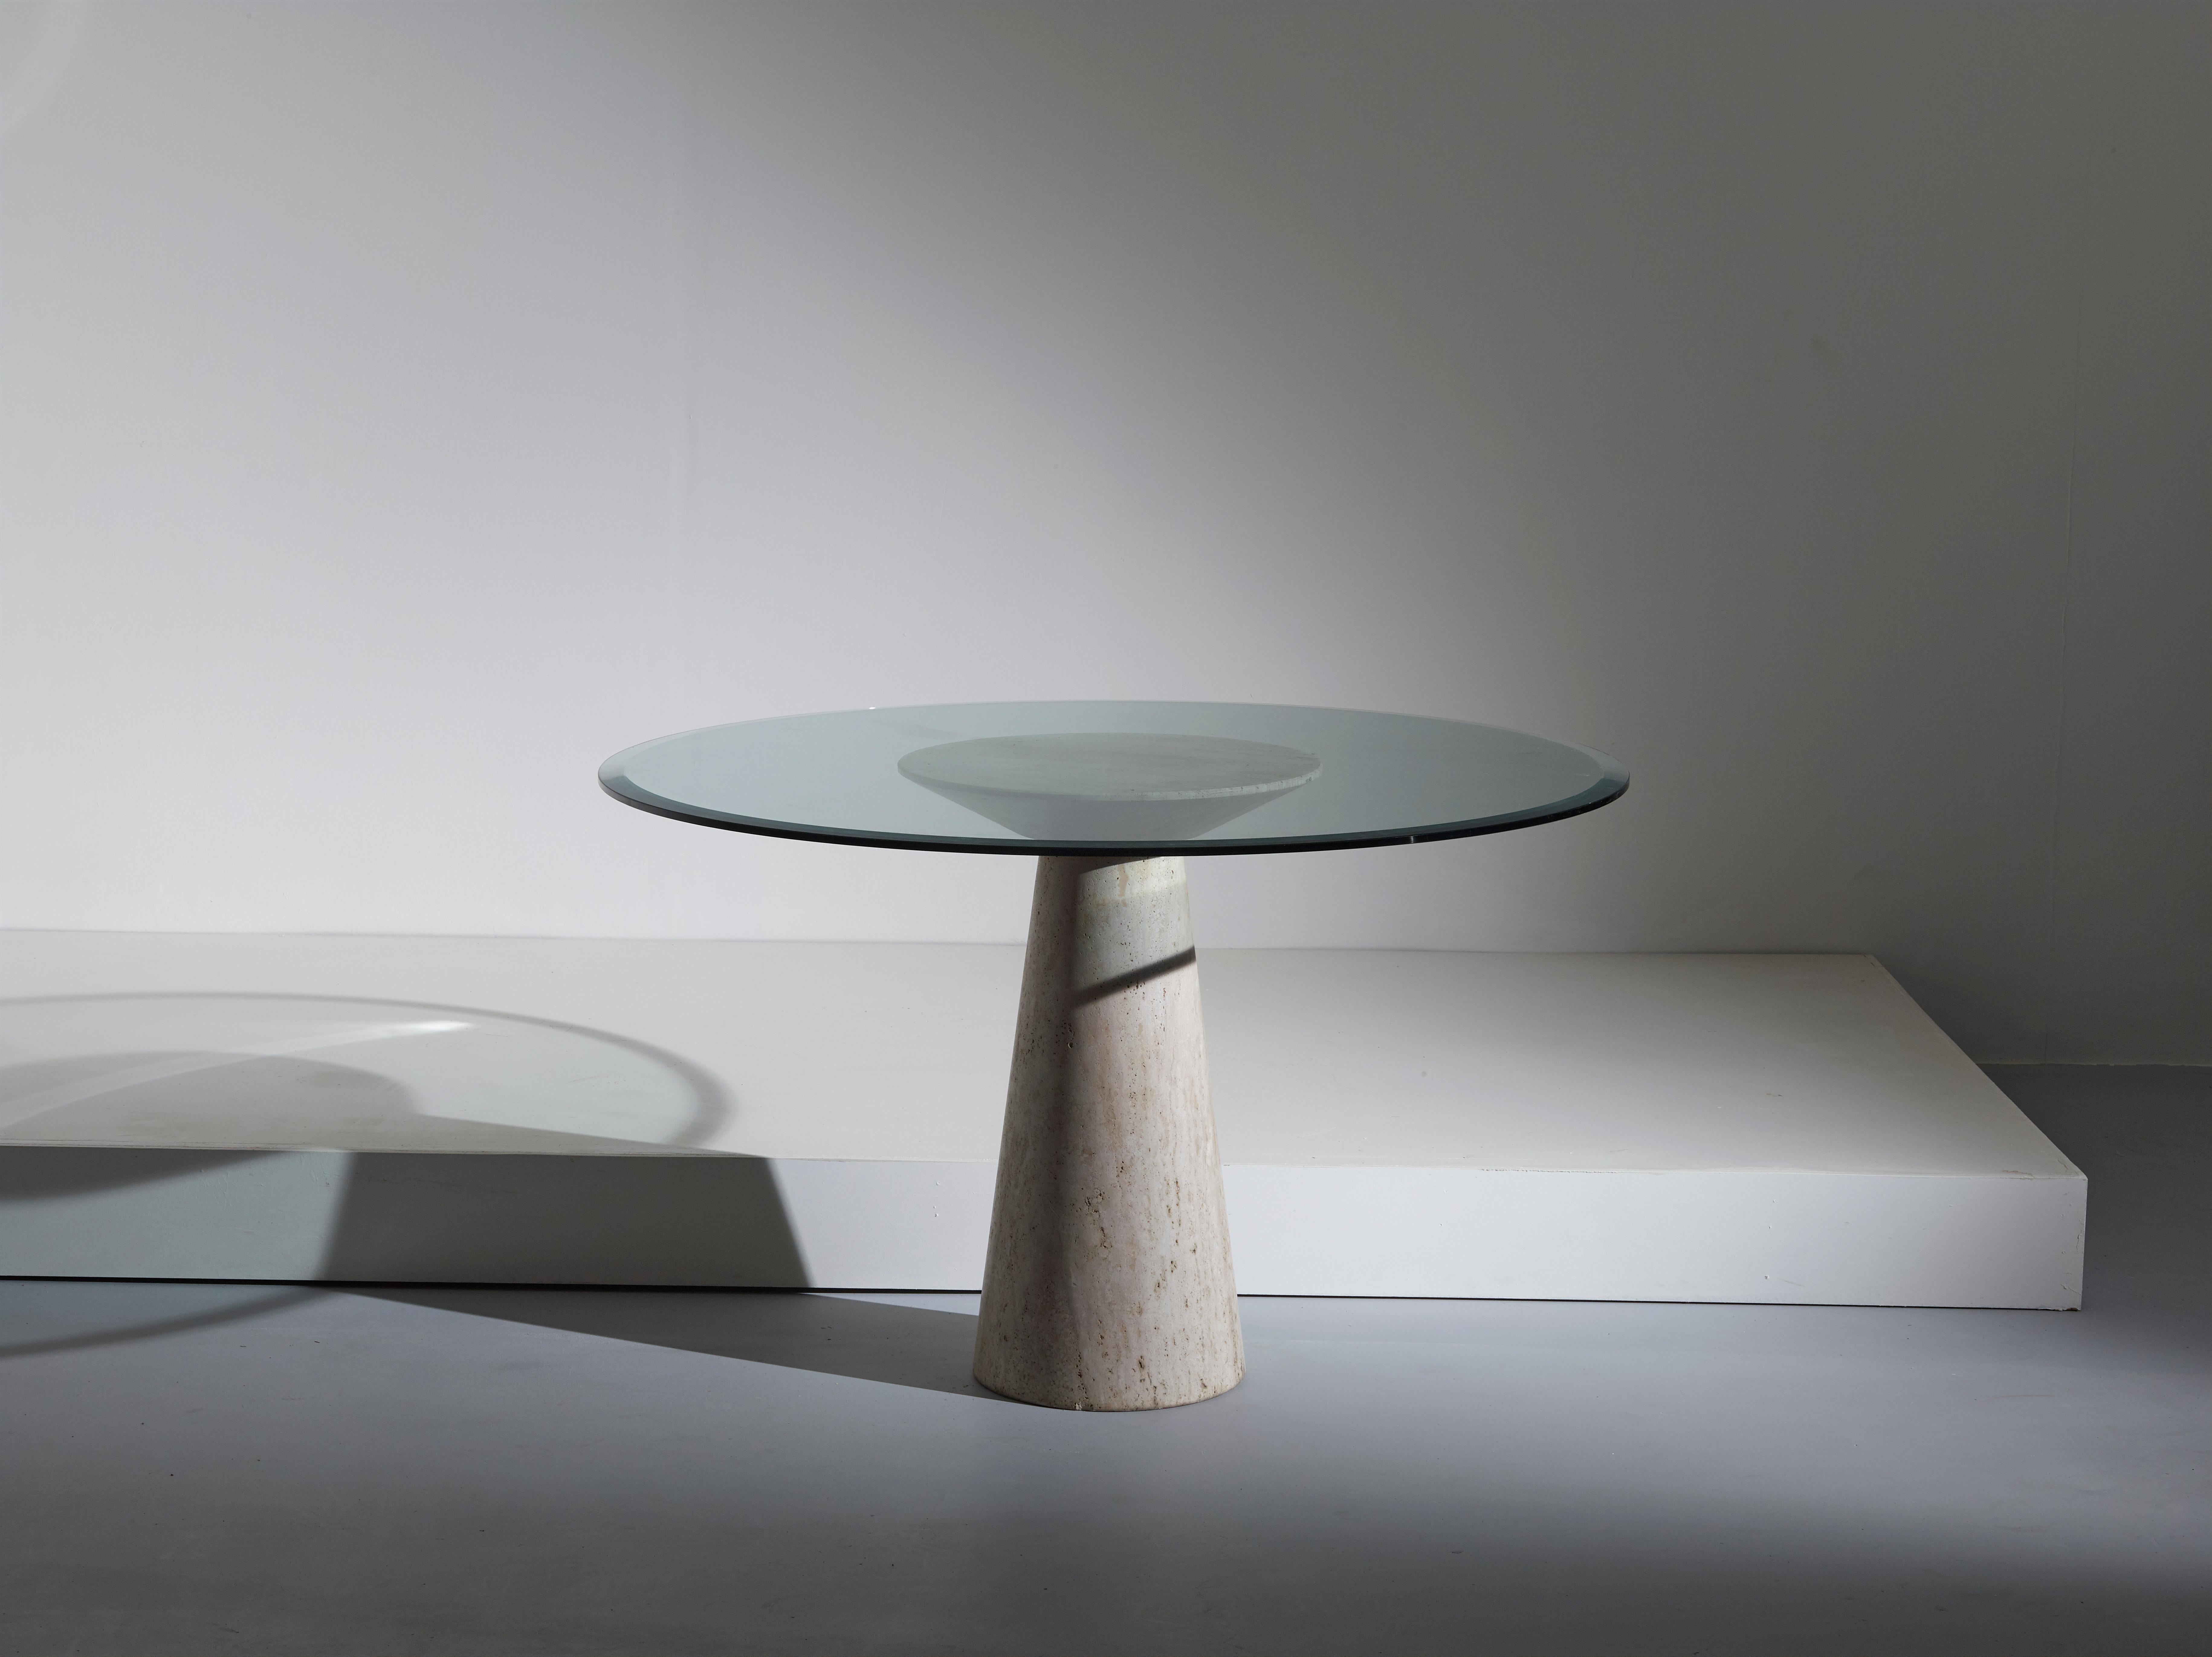 A beautiful round dining table with glass top attributed to Angelo Mangiarotti. The travertine stone used on the base emphasises and – at the same time – eases the classical but linear shape of this piece. 
This example has been produced in the